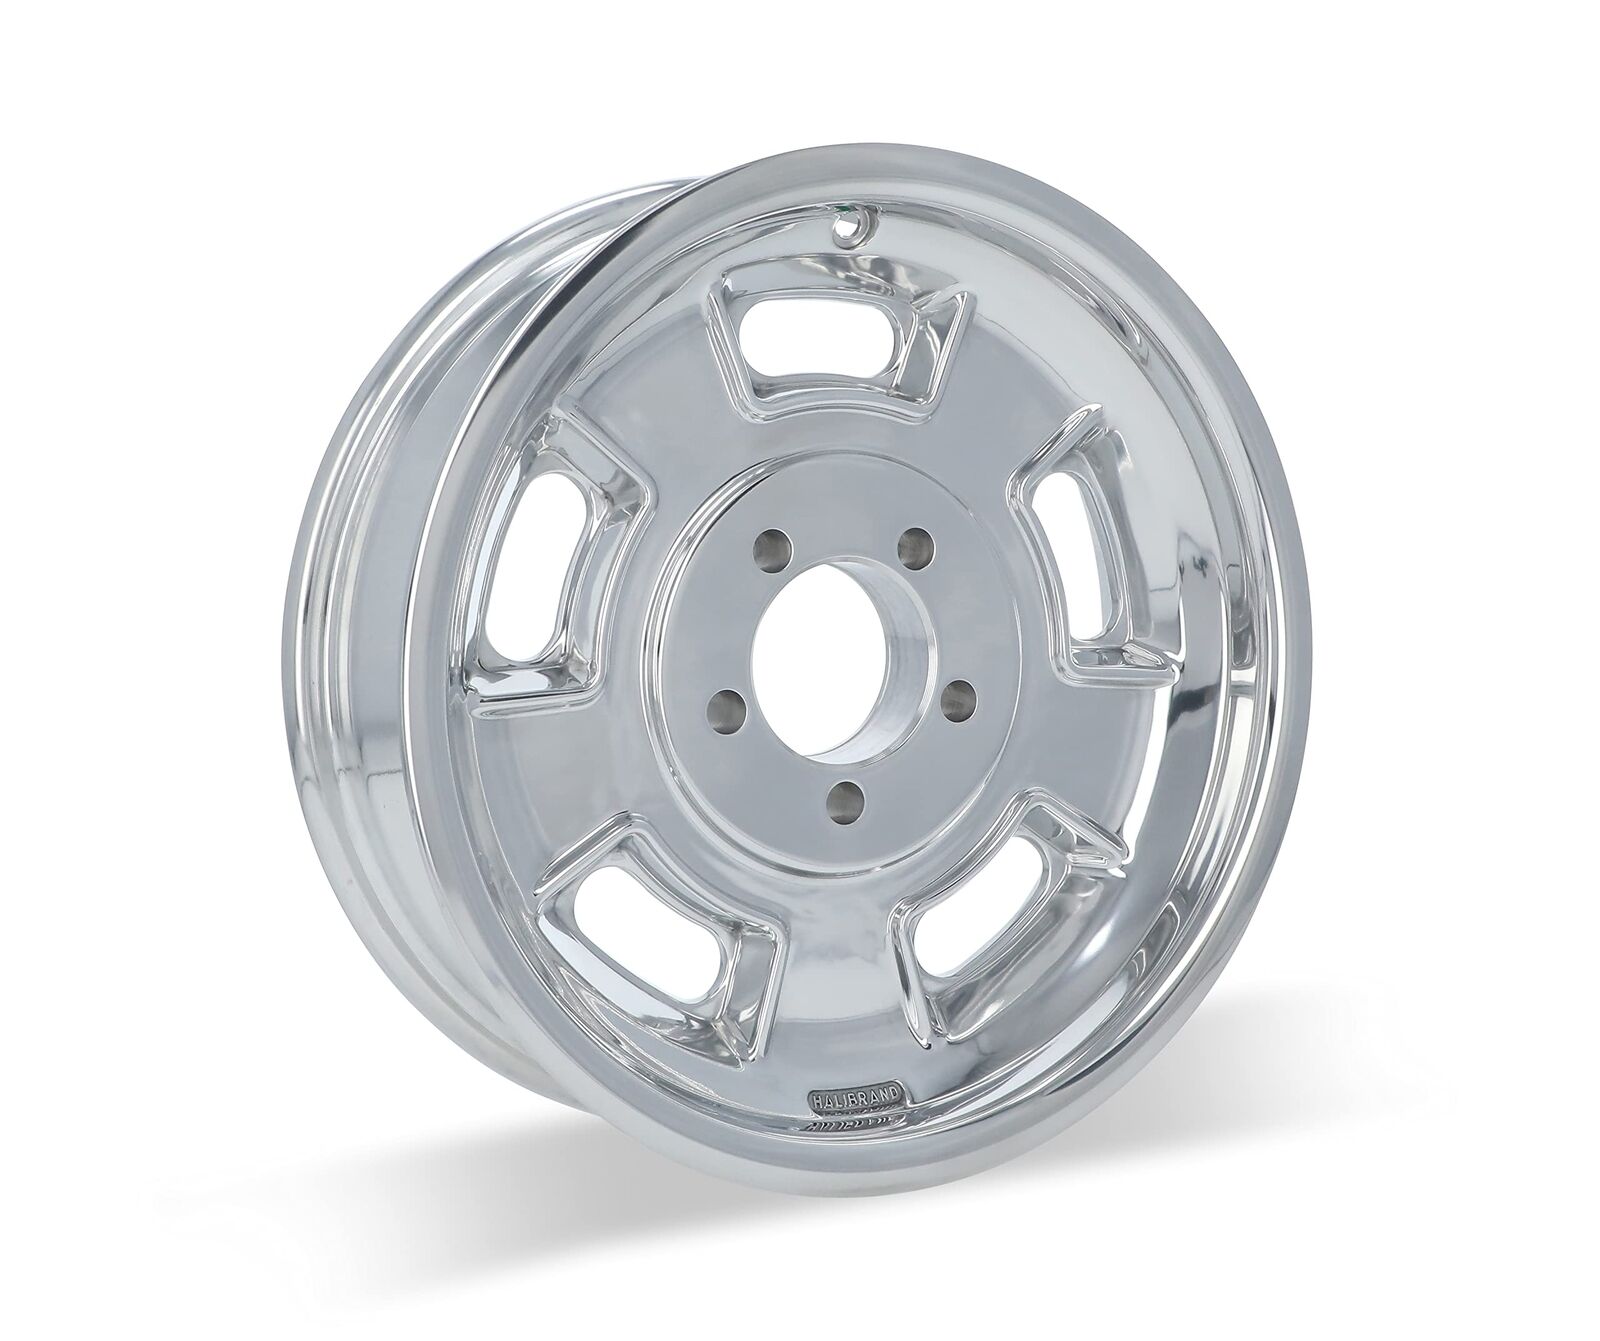 Halibrand Hb008-017 Sprint Wheel 15X4.5-5X4.5 2.13 Bs Polished No Clearcoat